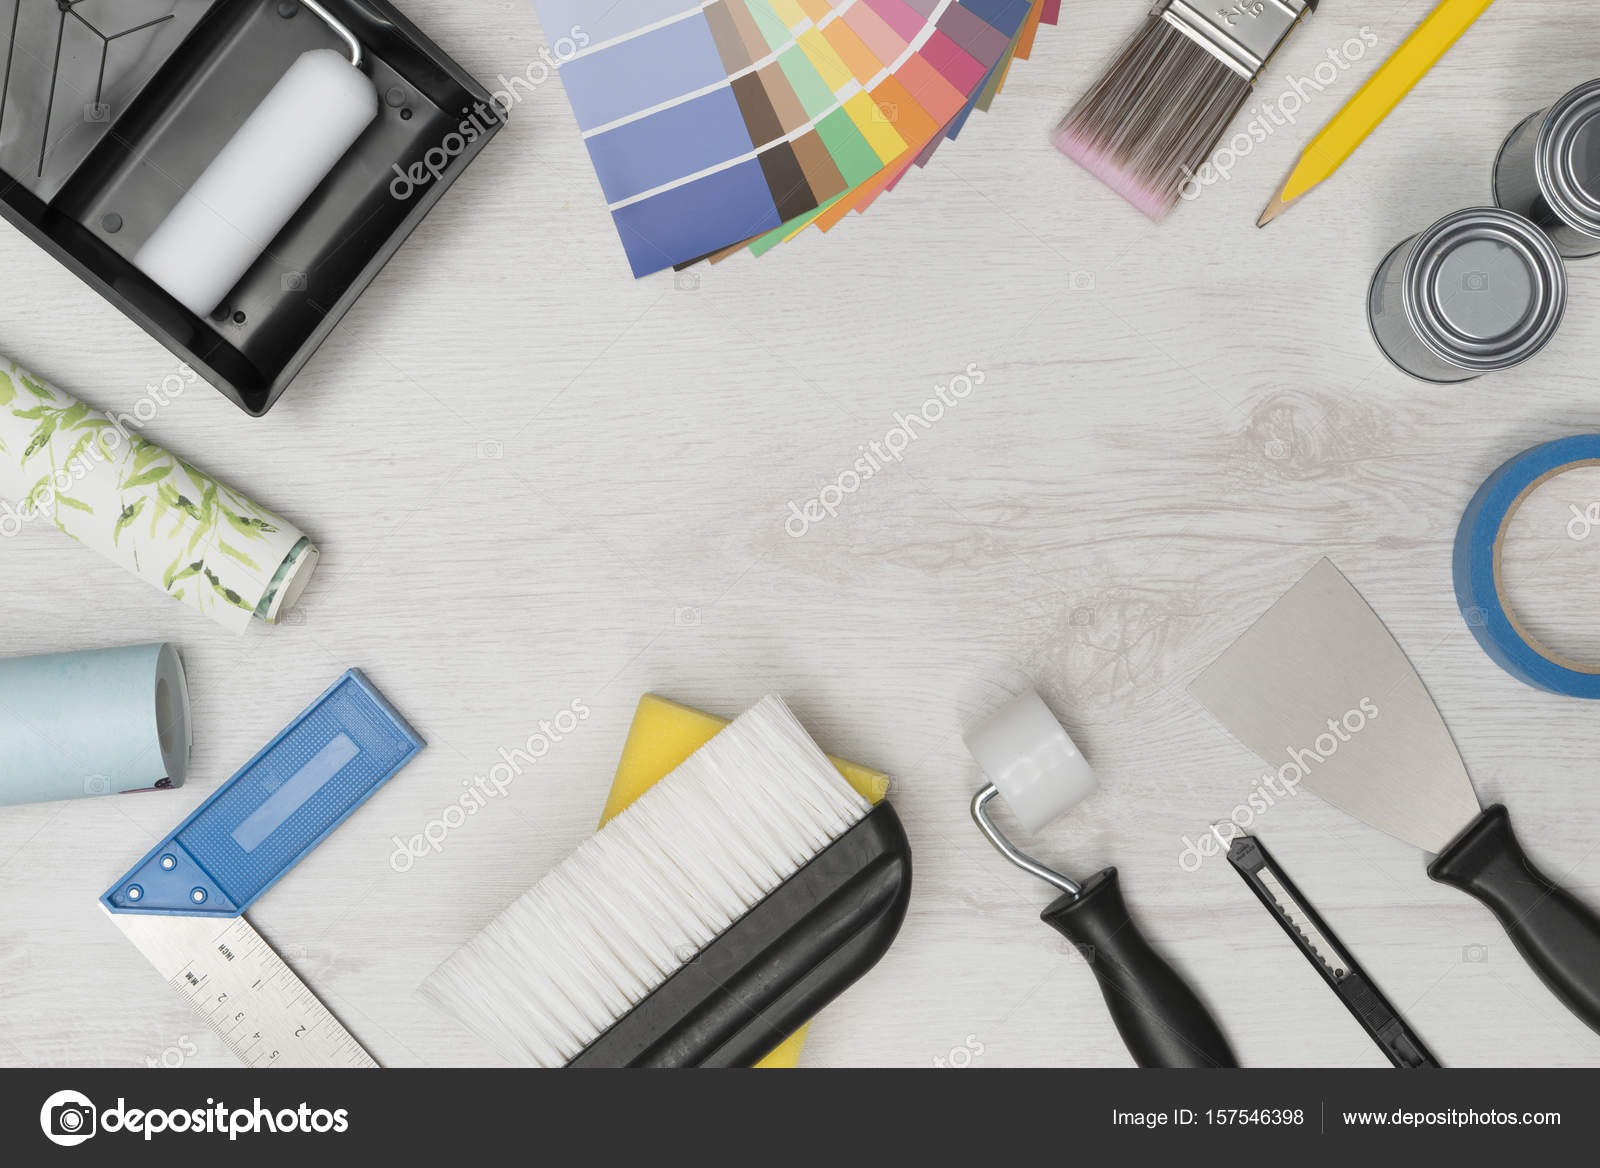 Banner Image of Home Improvement Painting Tools with Copy Space